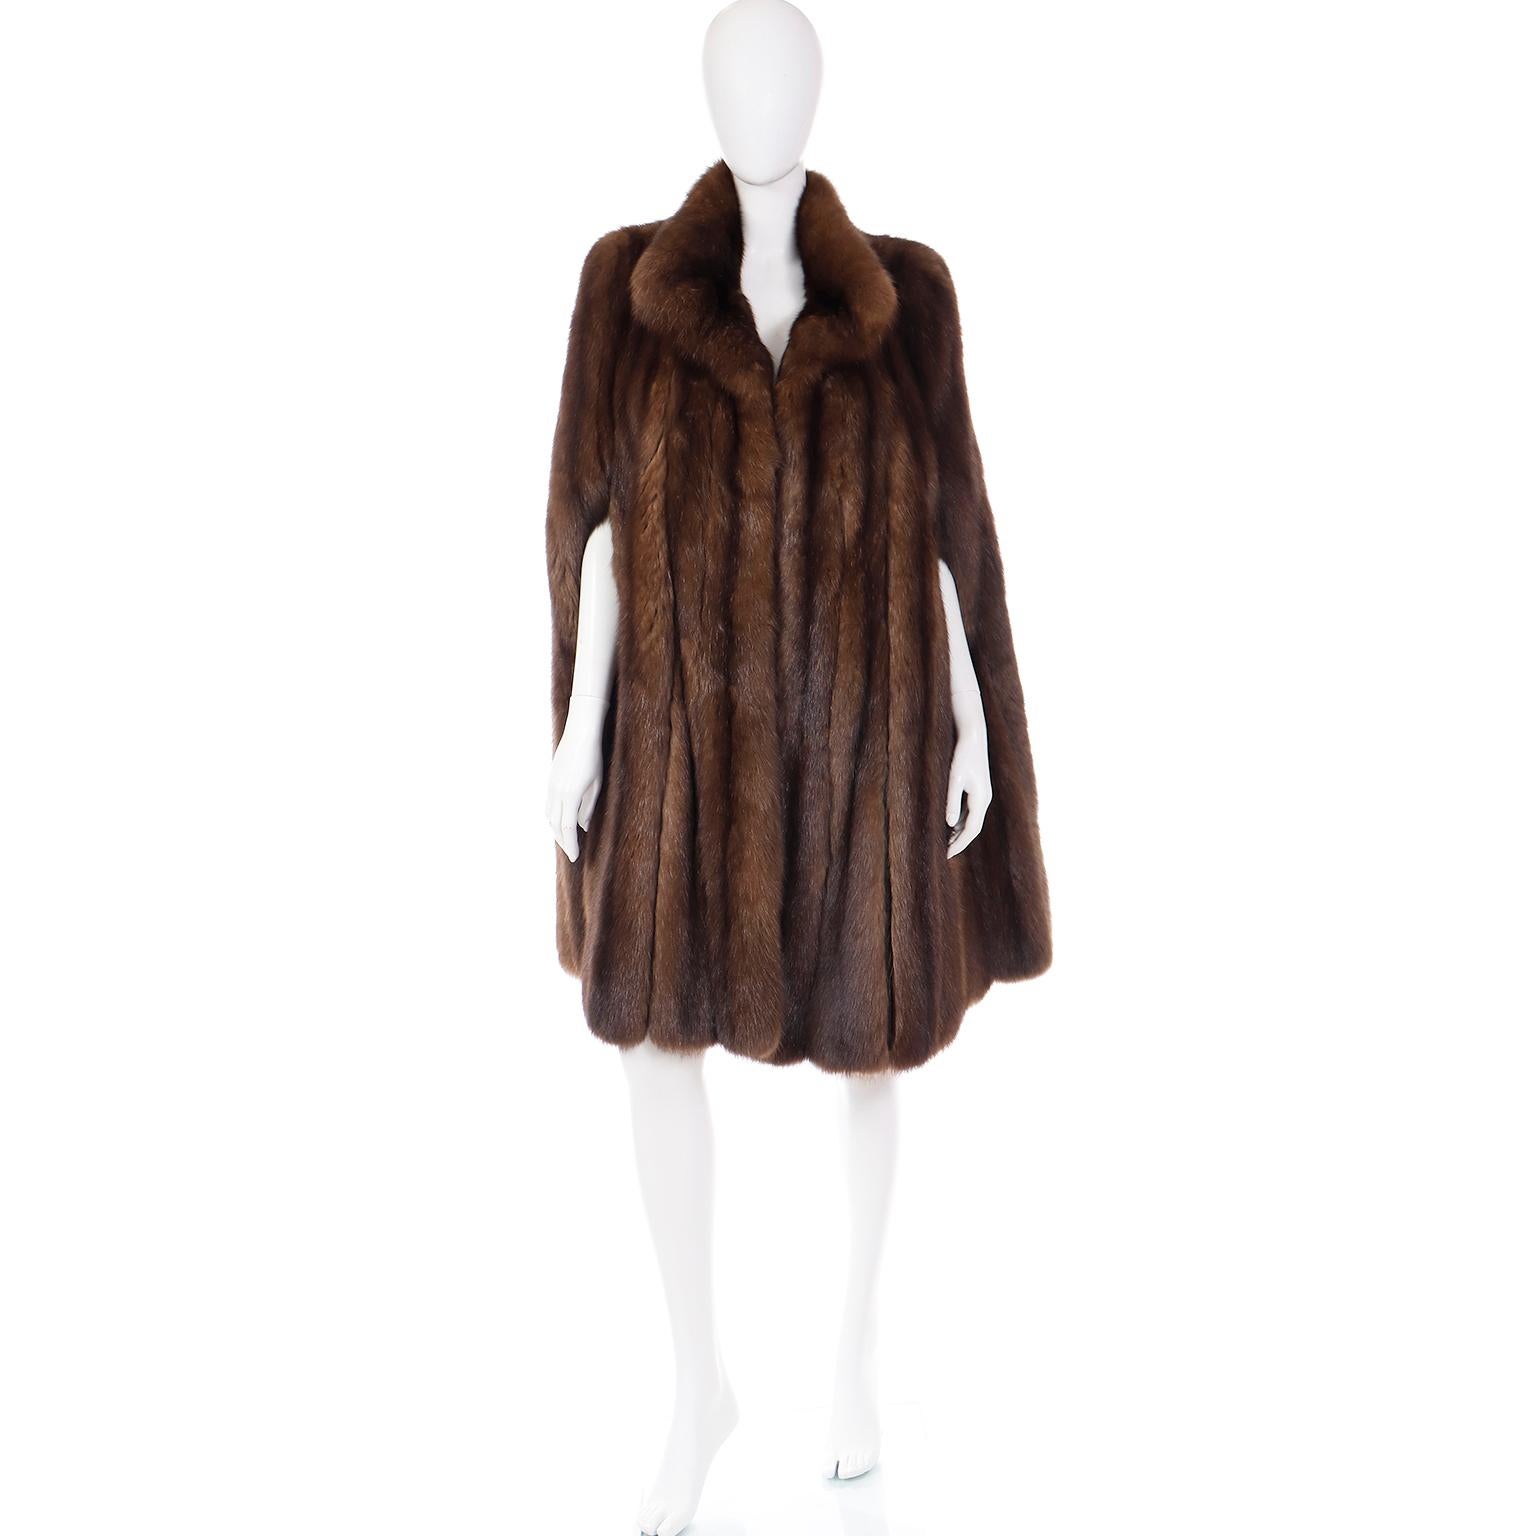 This is a gorgeous vintage Maximilian New York Russian sable mink fur cape. It's harder to find mink like this in a cape and this one is exceptionally luxurious. The coat is fully lined in silk and has slits for the arms. The original owner's